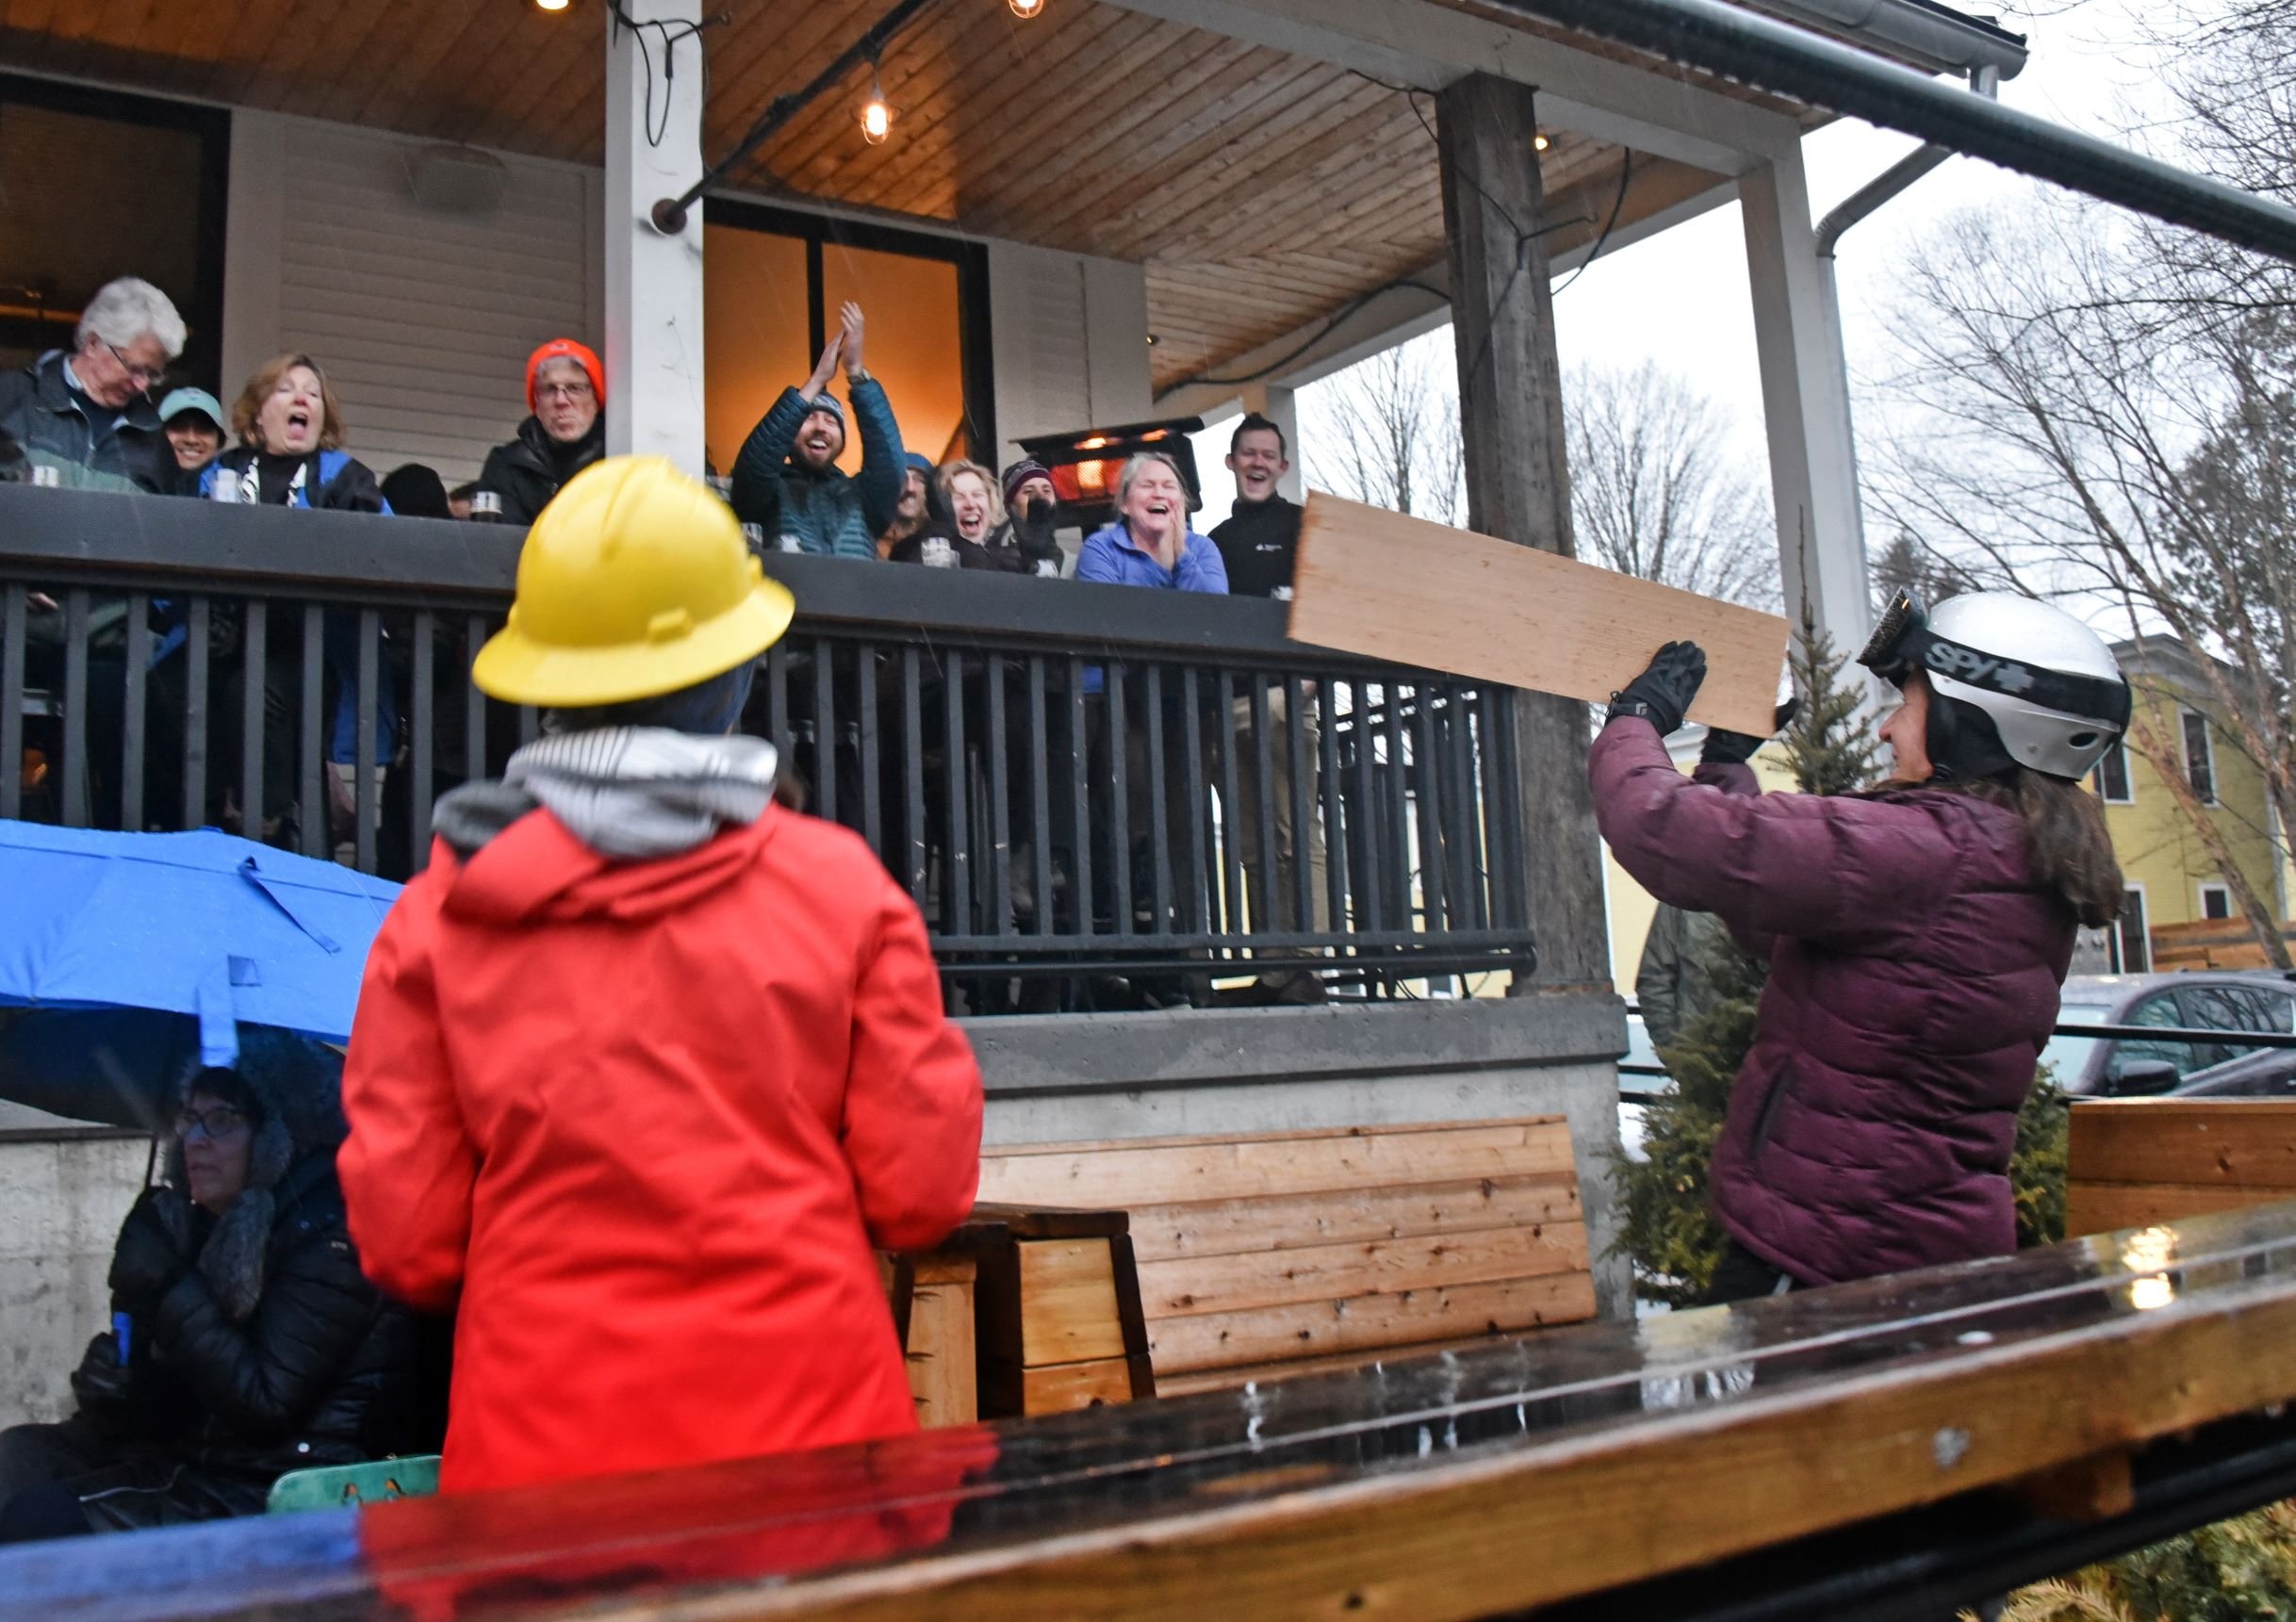  A small but enthusiastic crowd enjoyed the show from the covered porch at Pro Pig Brewery. Photo by Gordon Miller 